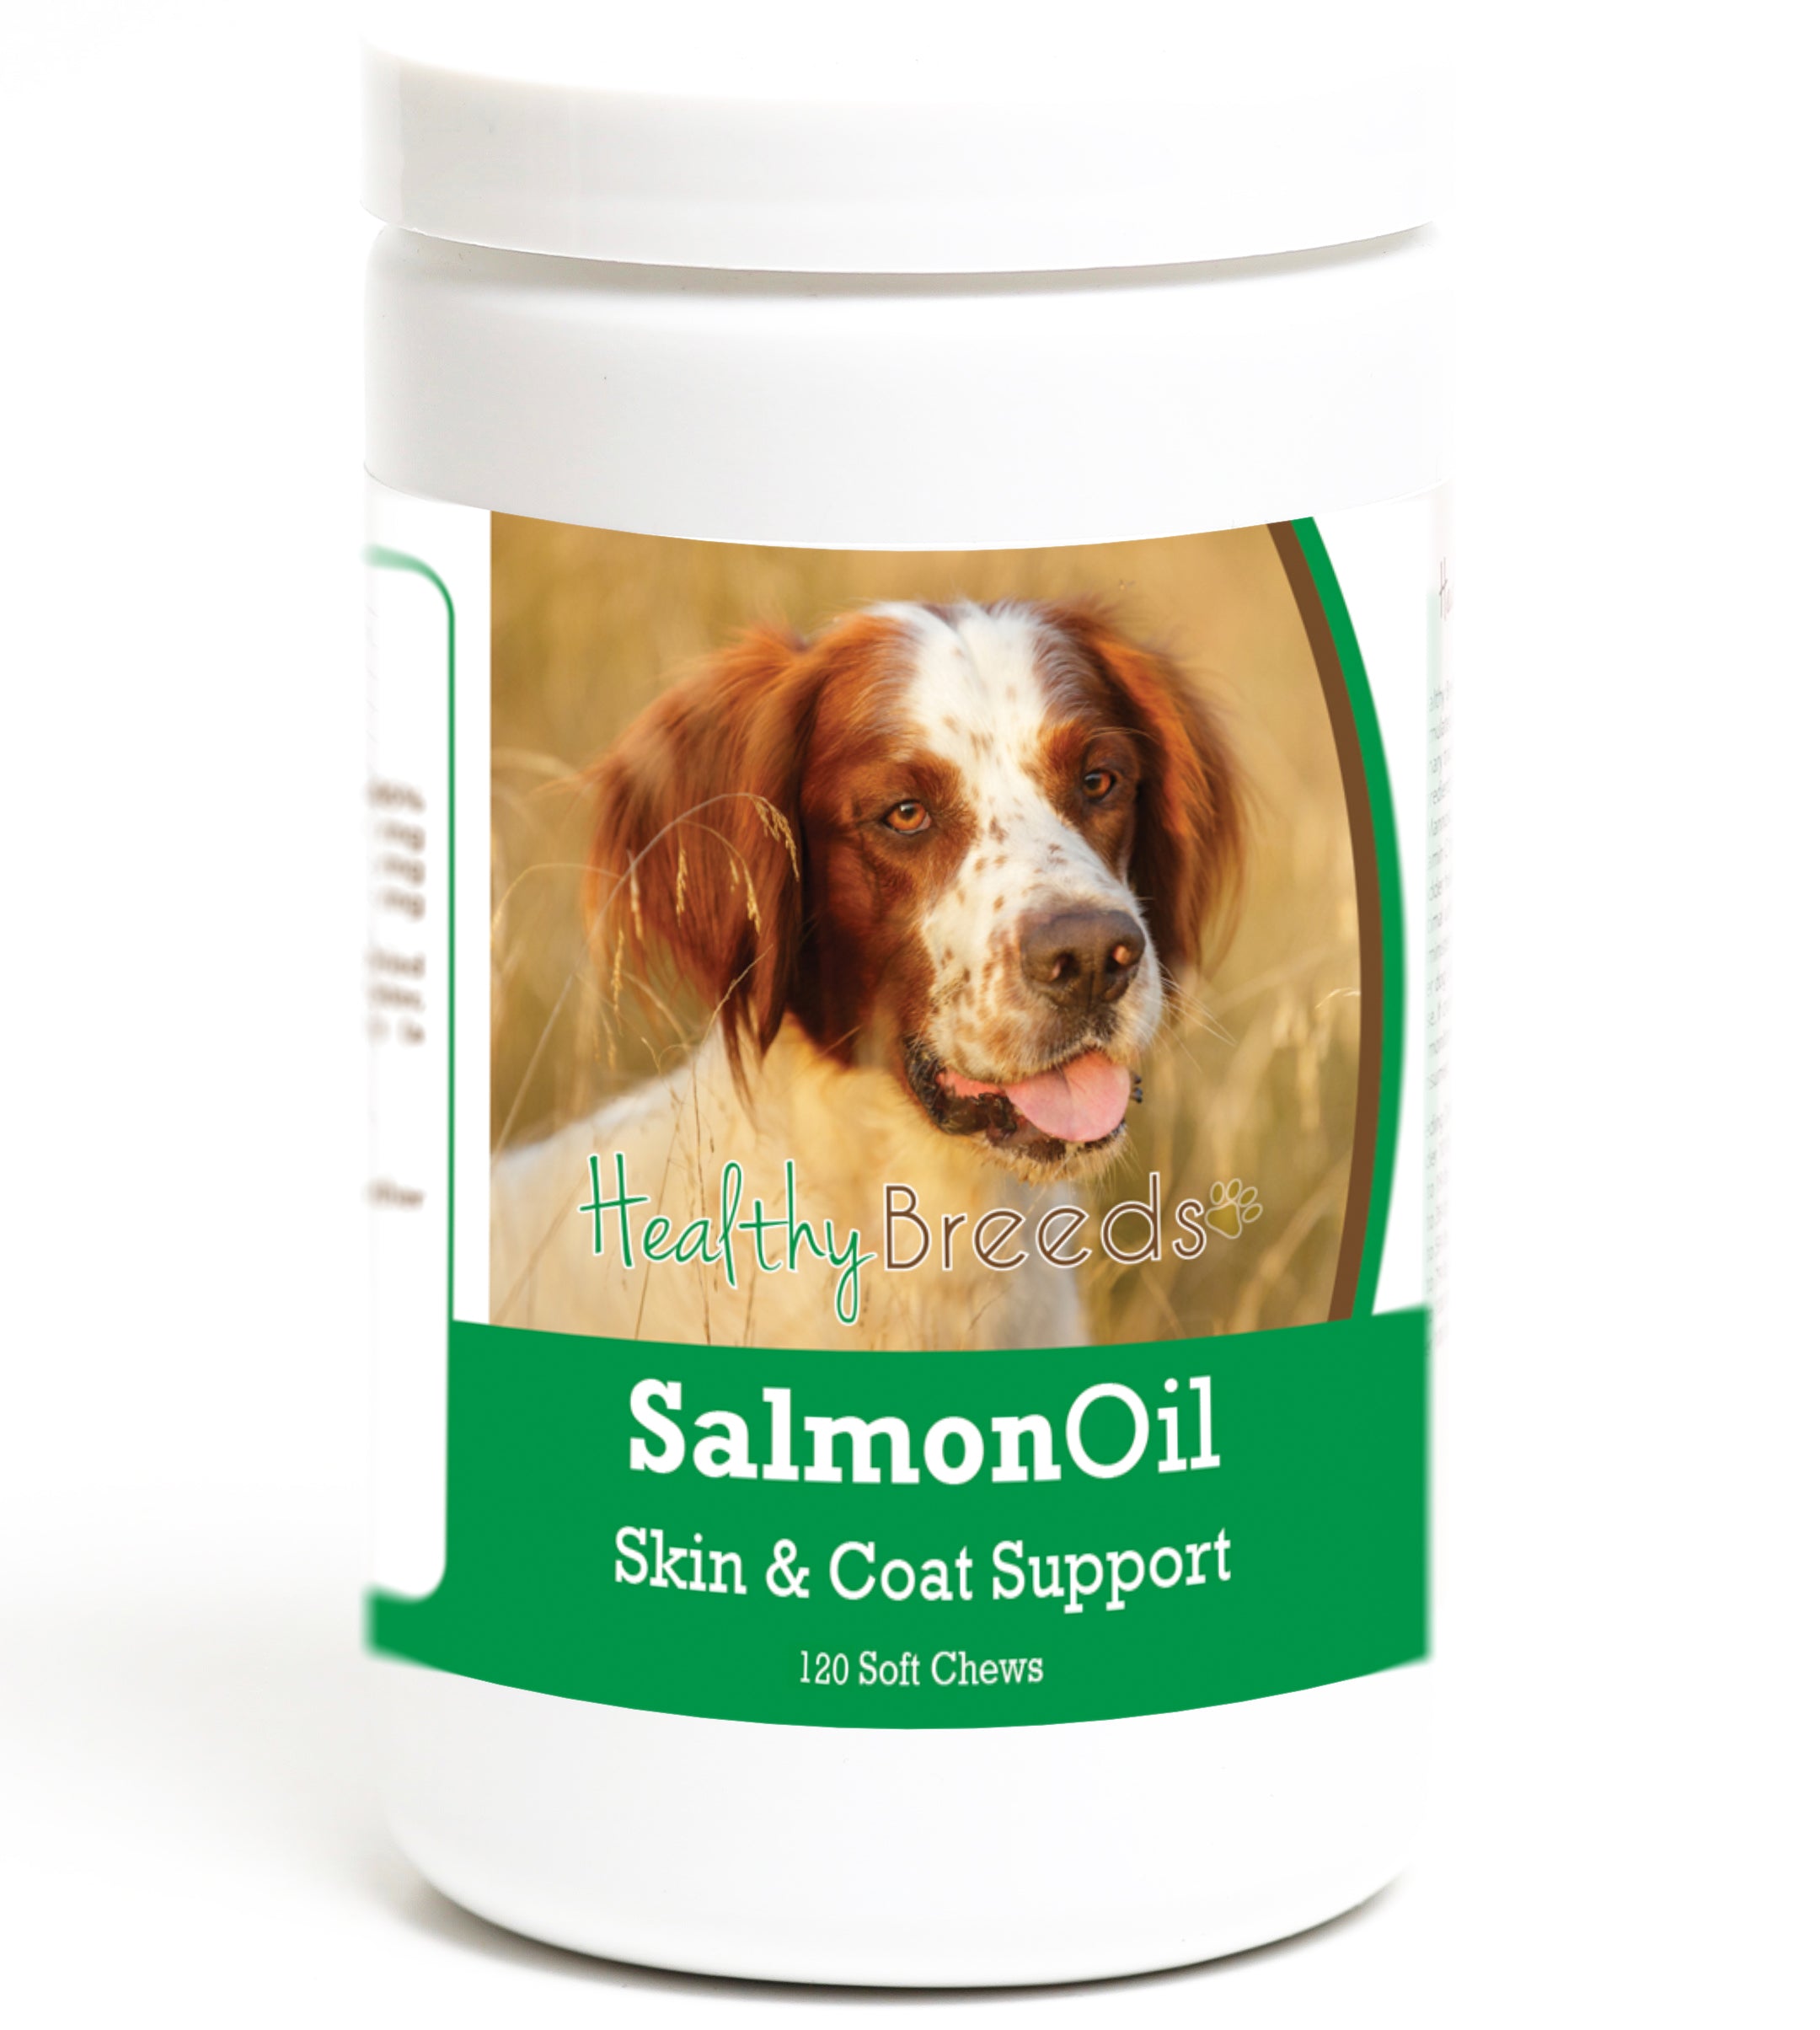 Irish Red and White Setter Salmon Oil Soft Chews 120 Count